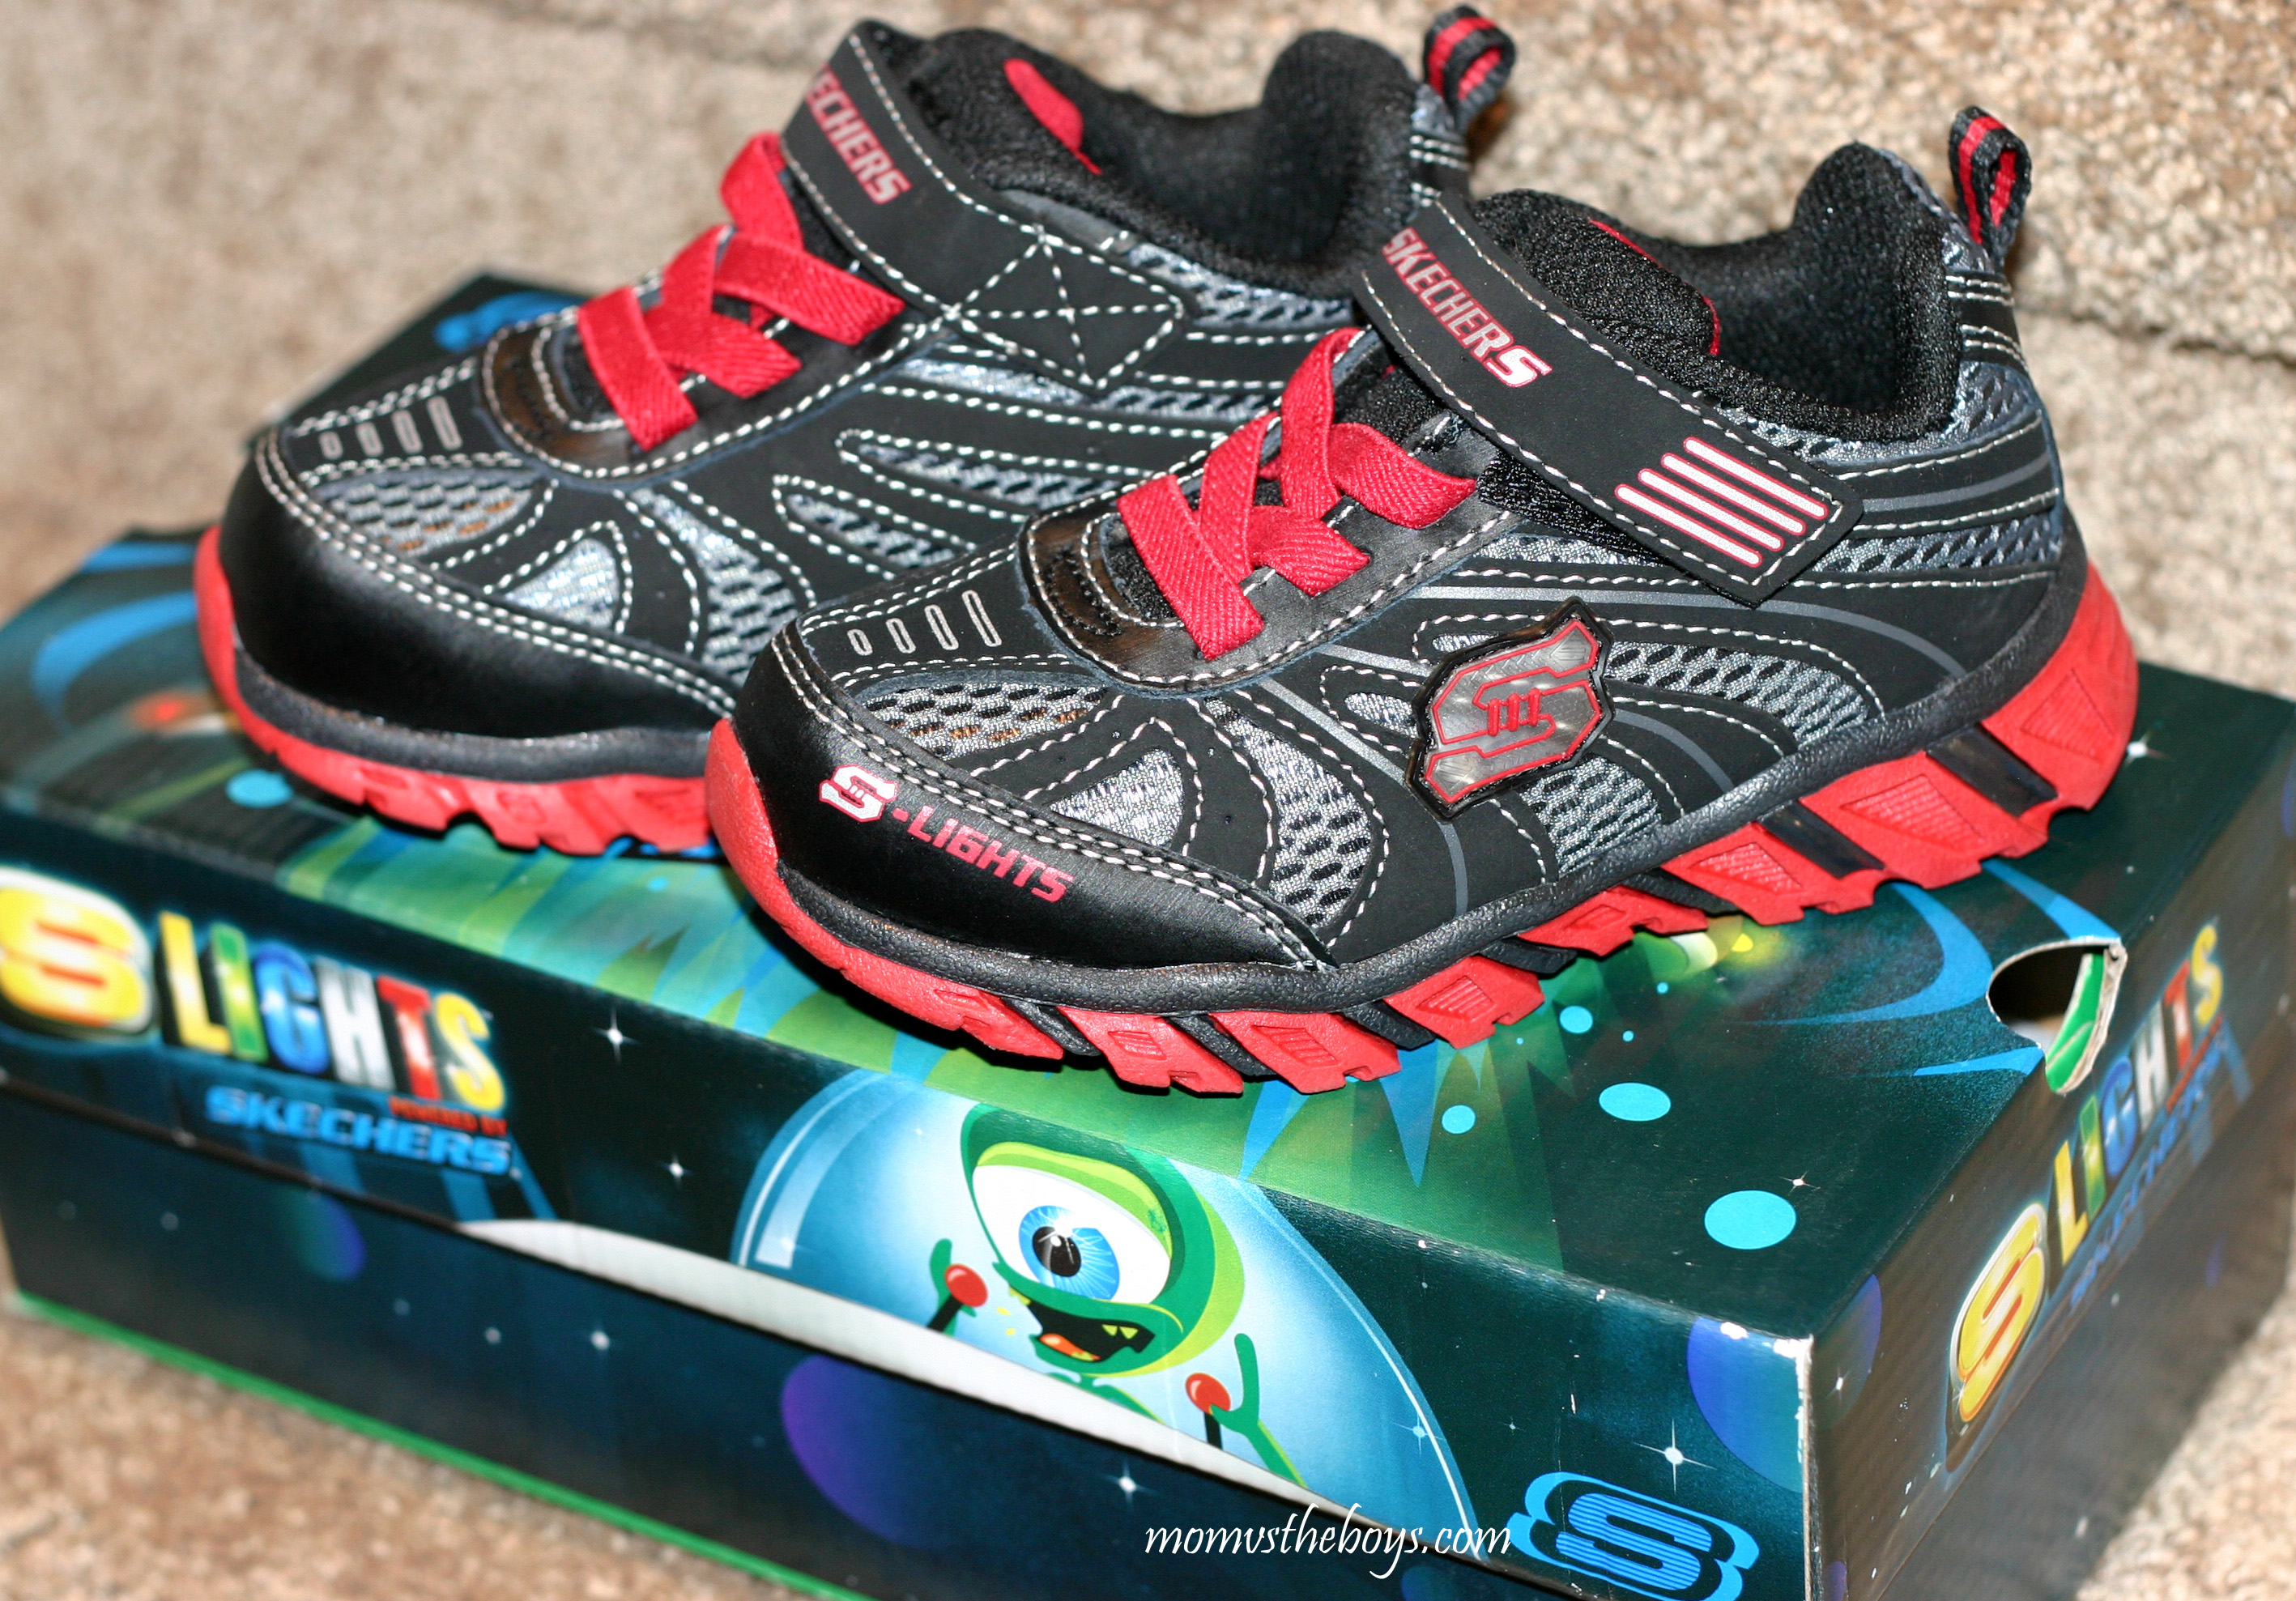 Light up Shoes for Boys from Skechers